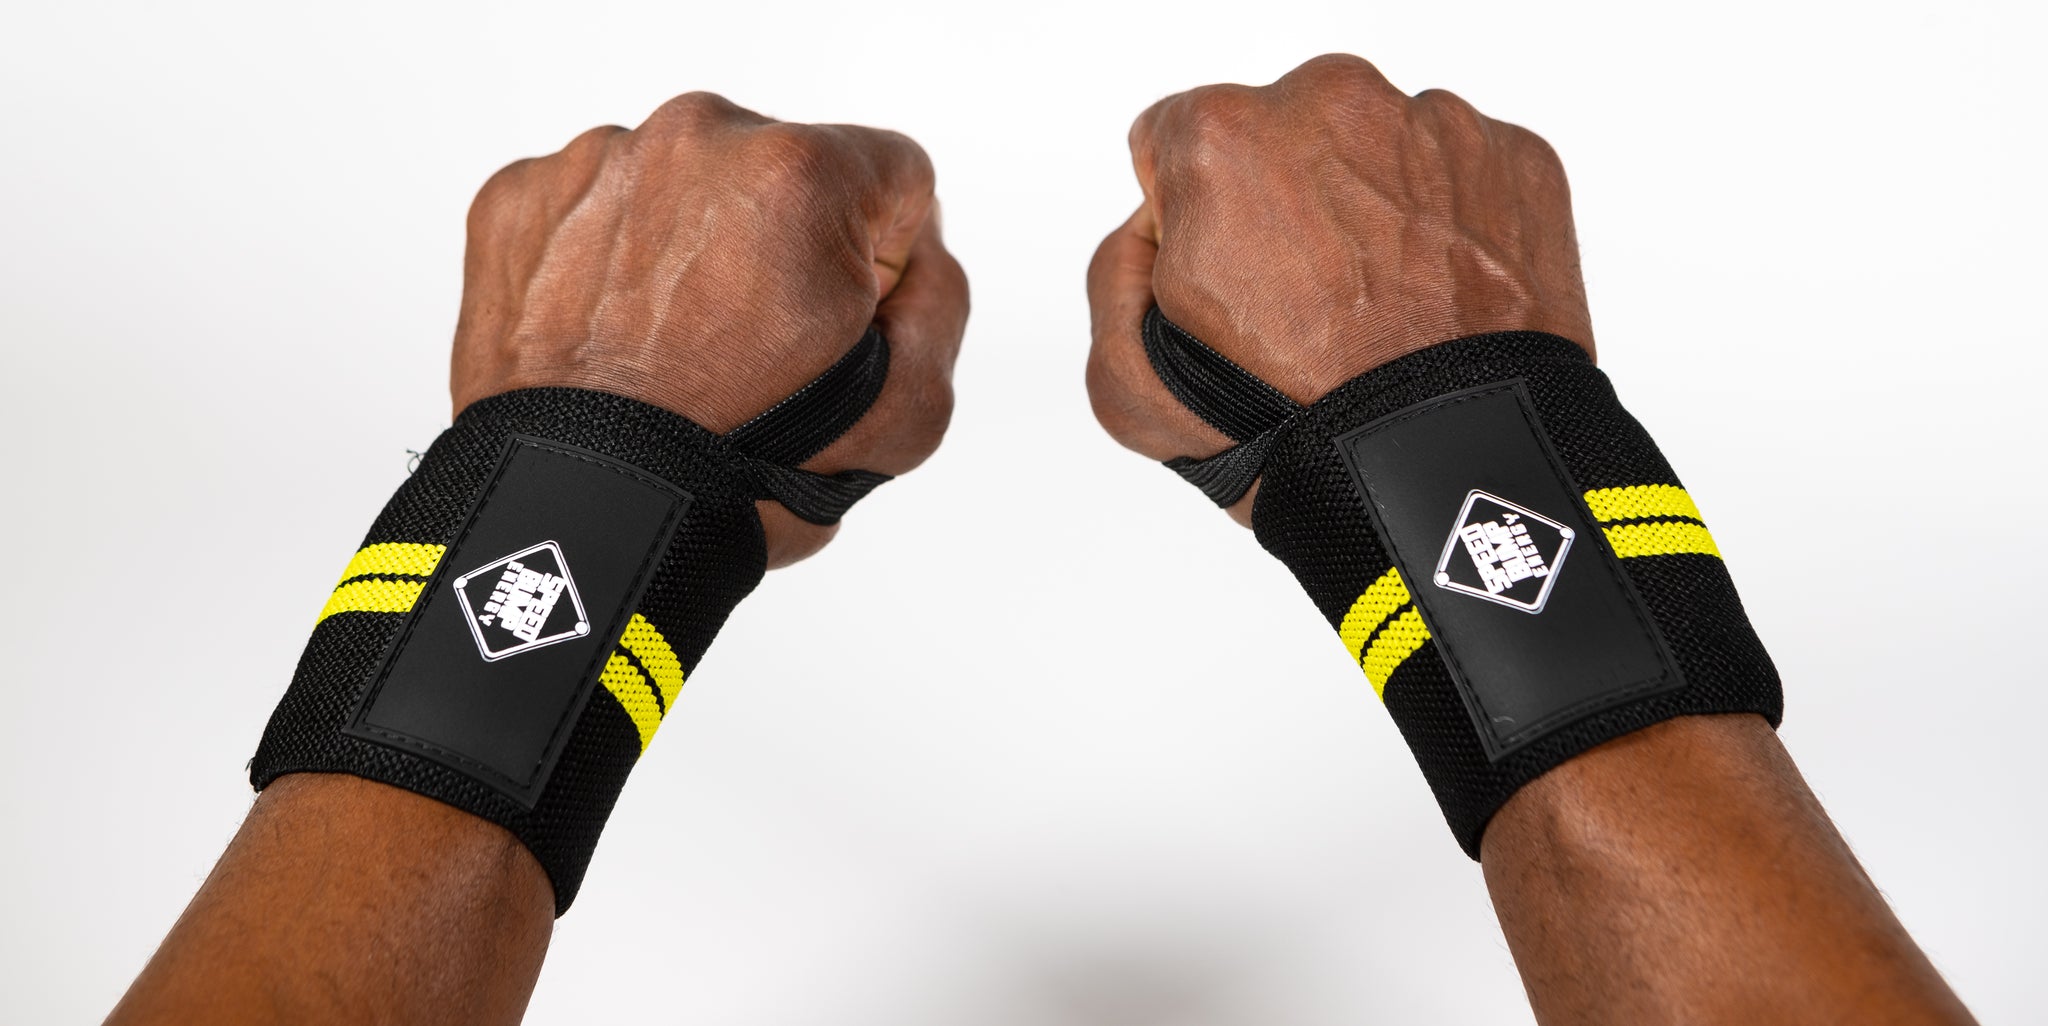 Weight Lifting Wrist Straps (Pair) 23” Padded Wrist Support for Pulls / Deadlift